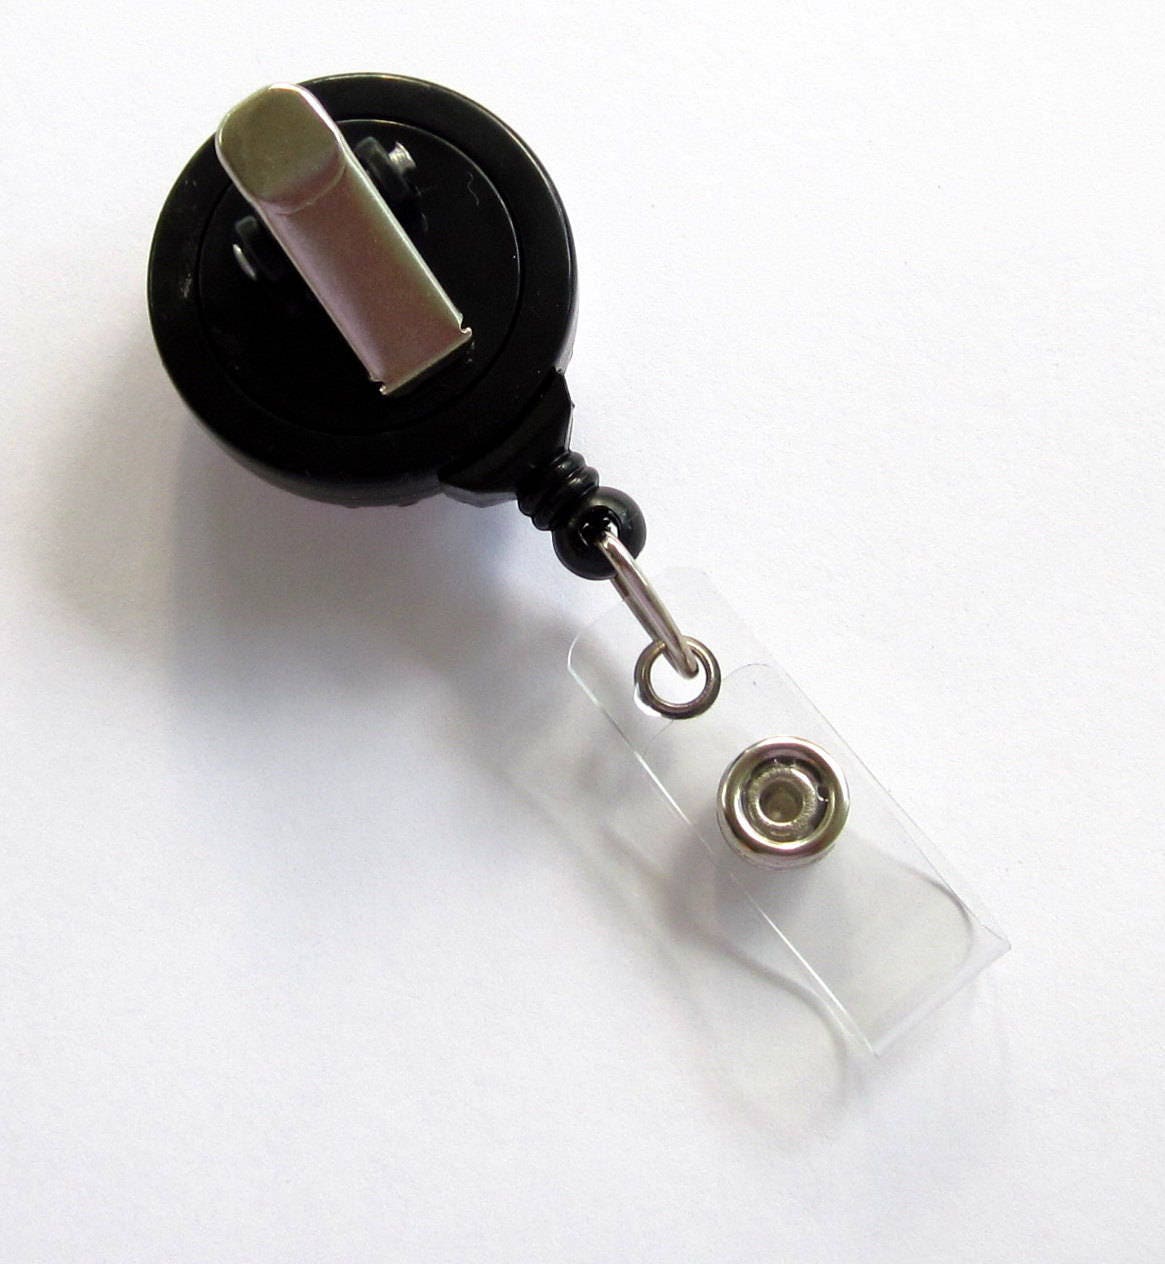 Retractable Badge Reel Medical Assistant Badge Holder With Swivel